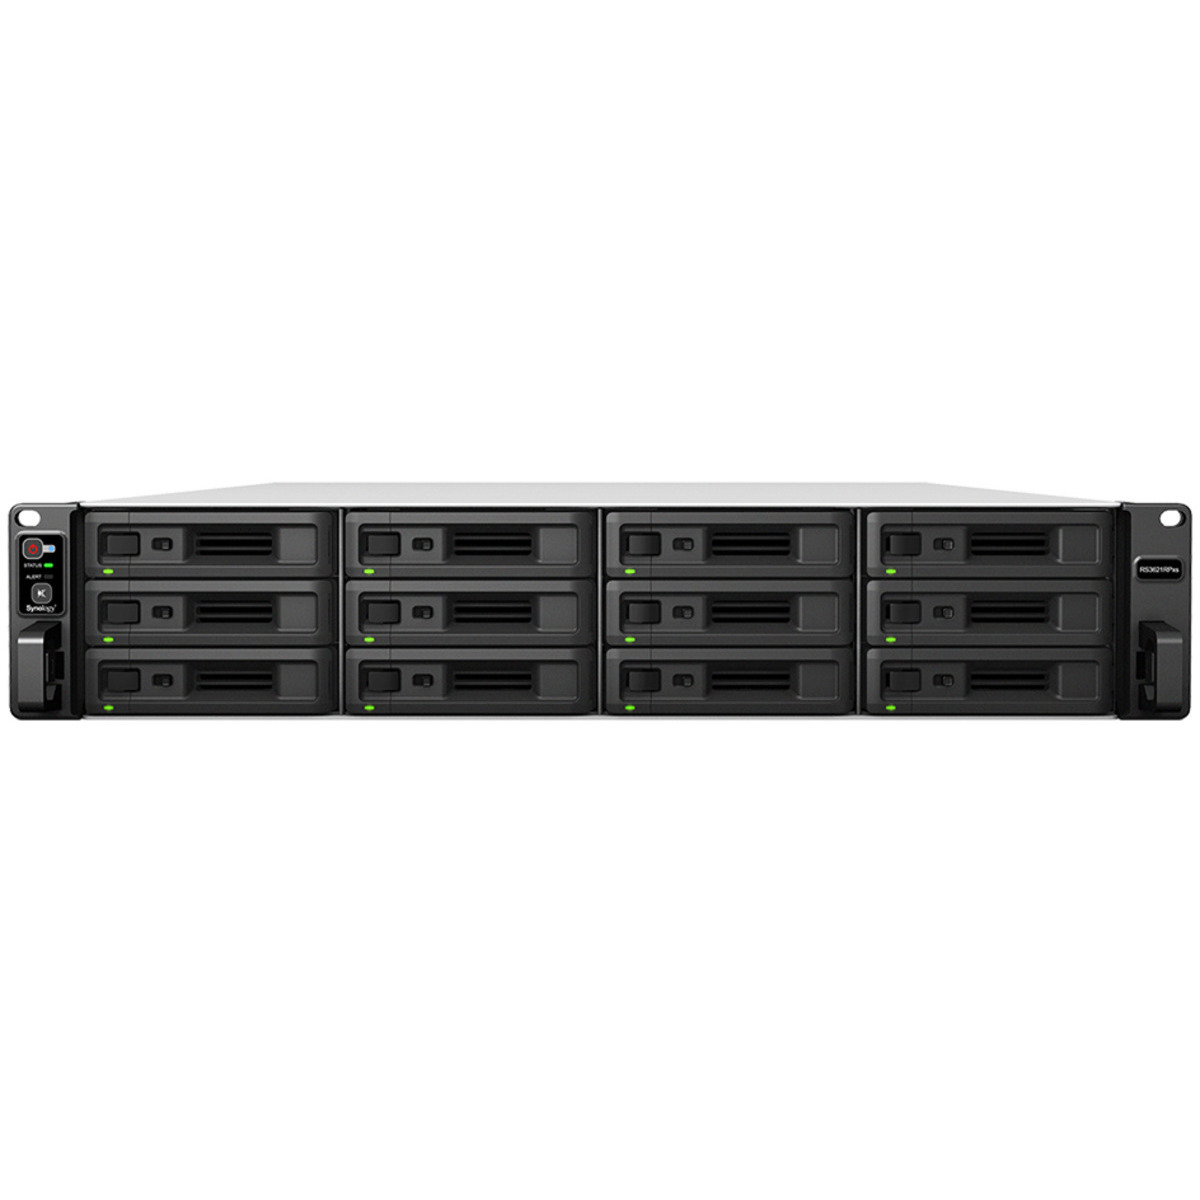 Synology RackStation RS3621RPxs 240tb 12-Bay RackMount Large Business / Enterprise NAS - Network Attached Storage Device 12x20tb Toshiba Enterprise Capacity MG10ACA20TE 3.5 7200rpm SATA 6Gb/s HDD ENTERPRISE Class Drives Installed - Burn-In Tested RackStation RS3621RPxs